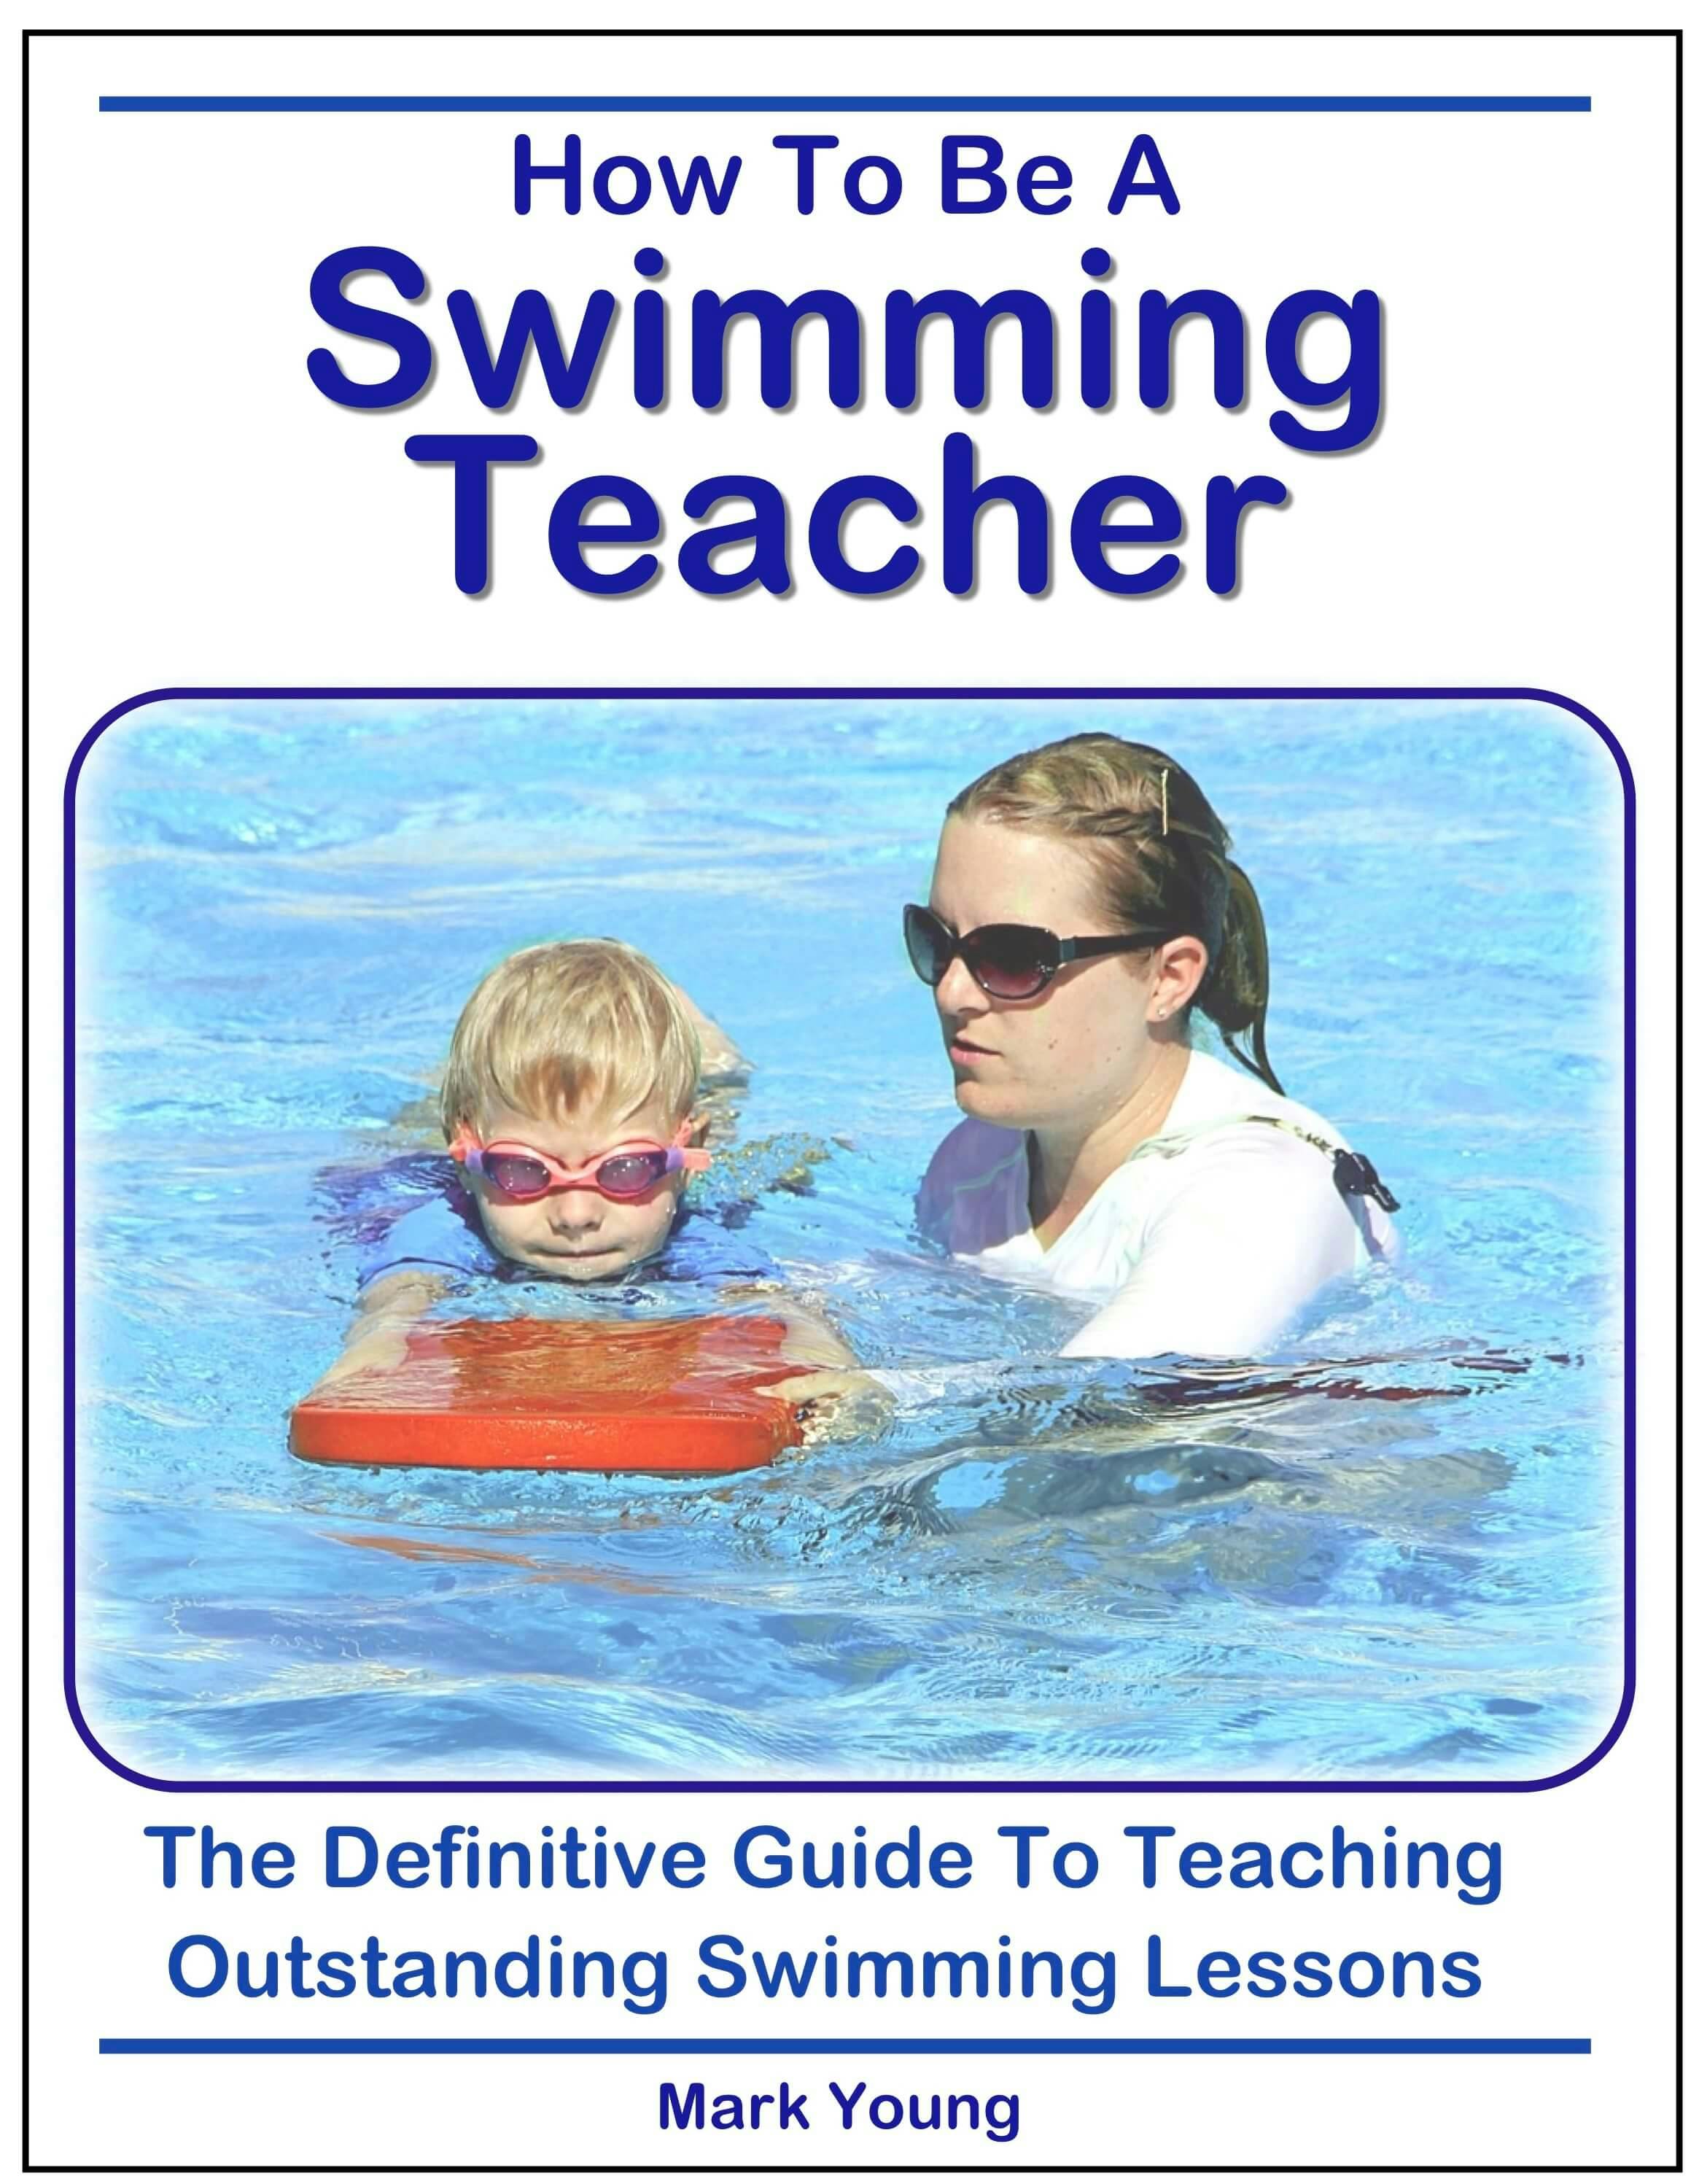 How to teach outstanding swimming lessons